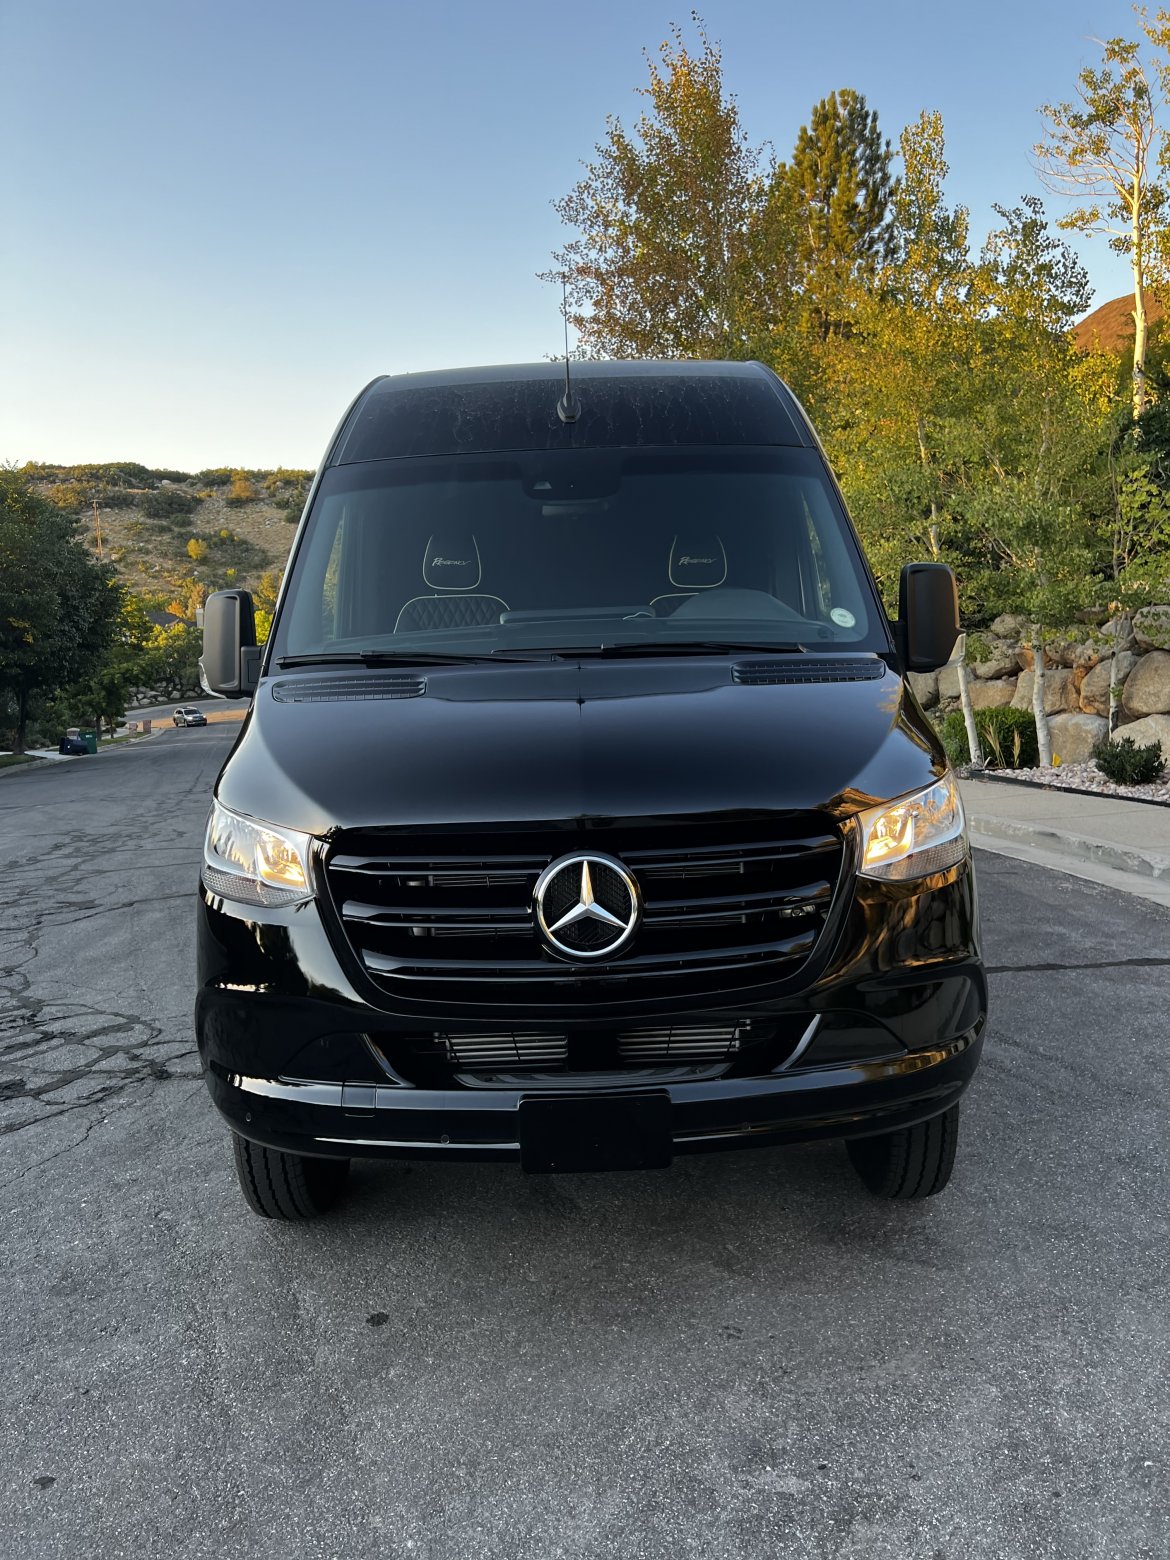 Sprinter for sale: 2022 Mercedes-Benz sprinter 3500 XD by Iconic